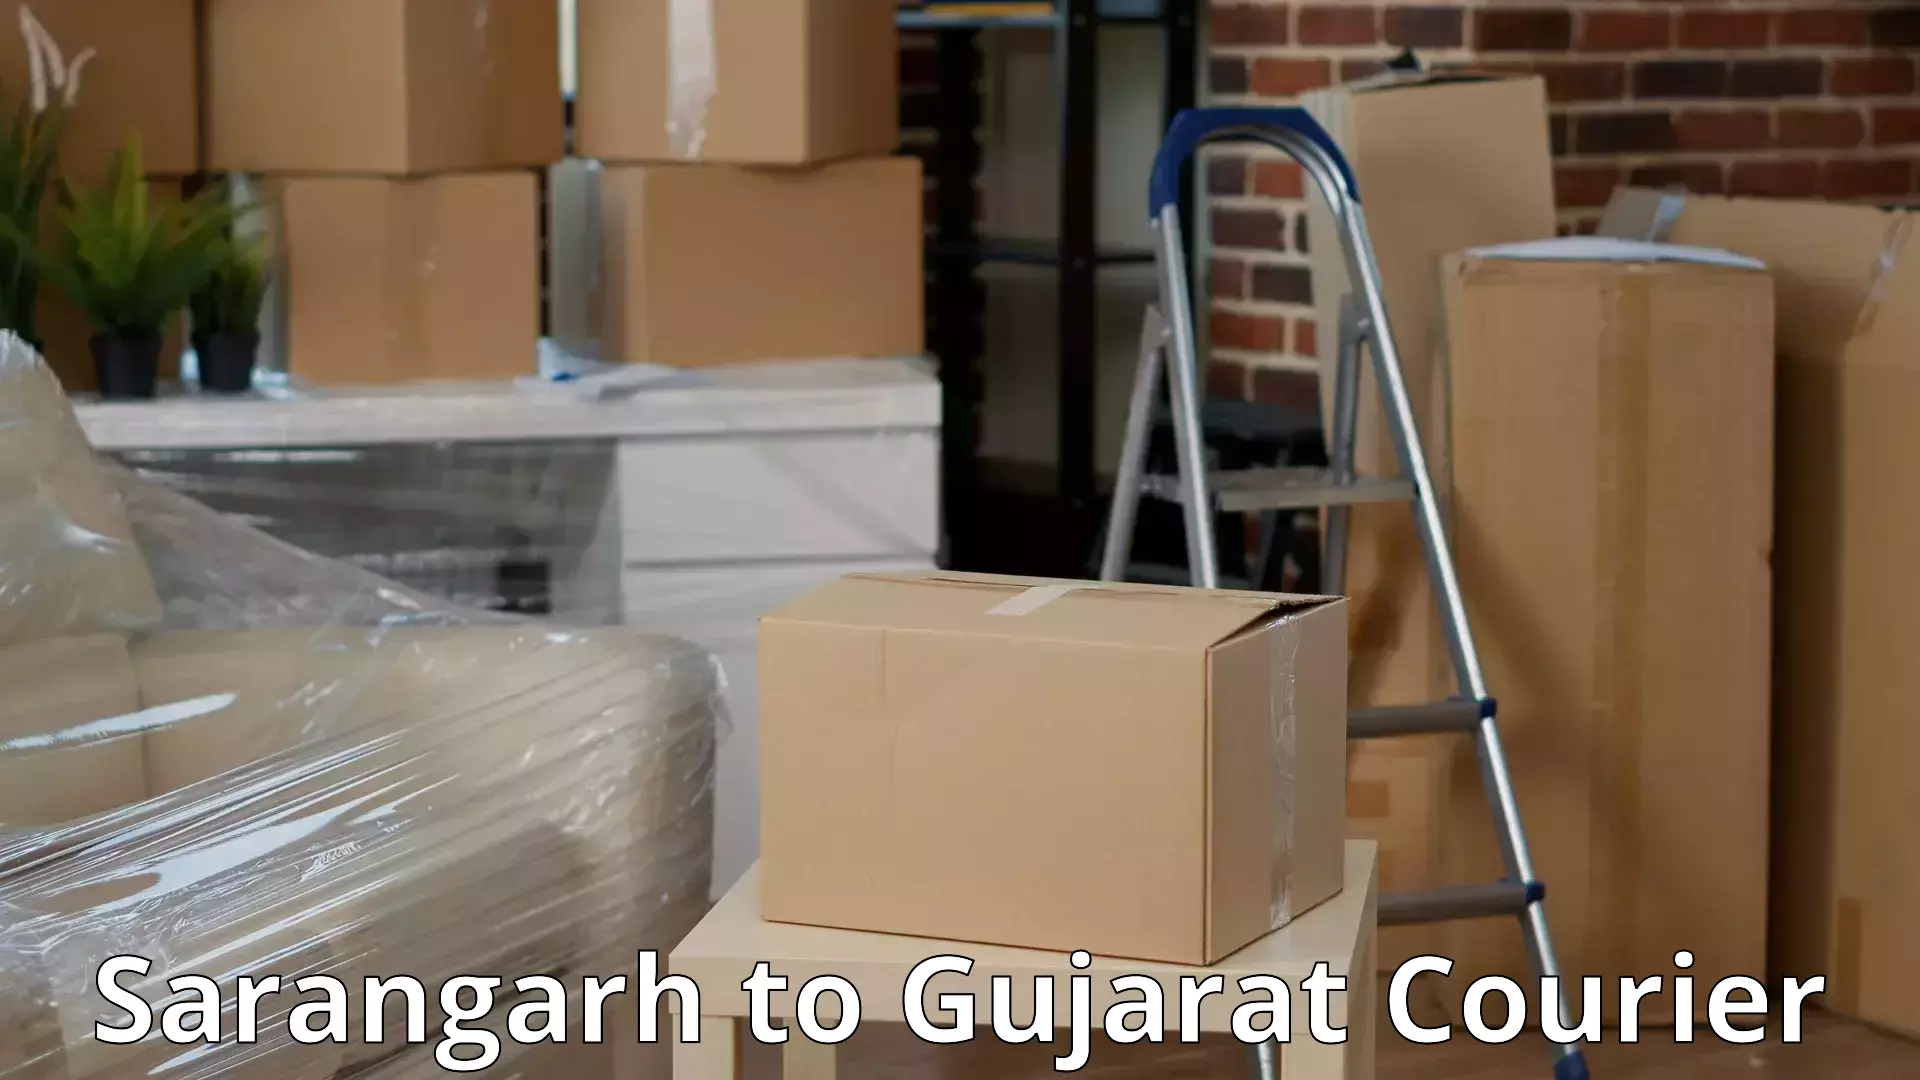 Furniture moving assistance in Sarangarh to Panchmahal